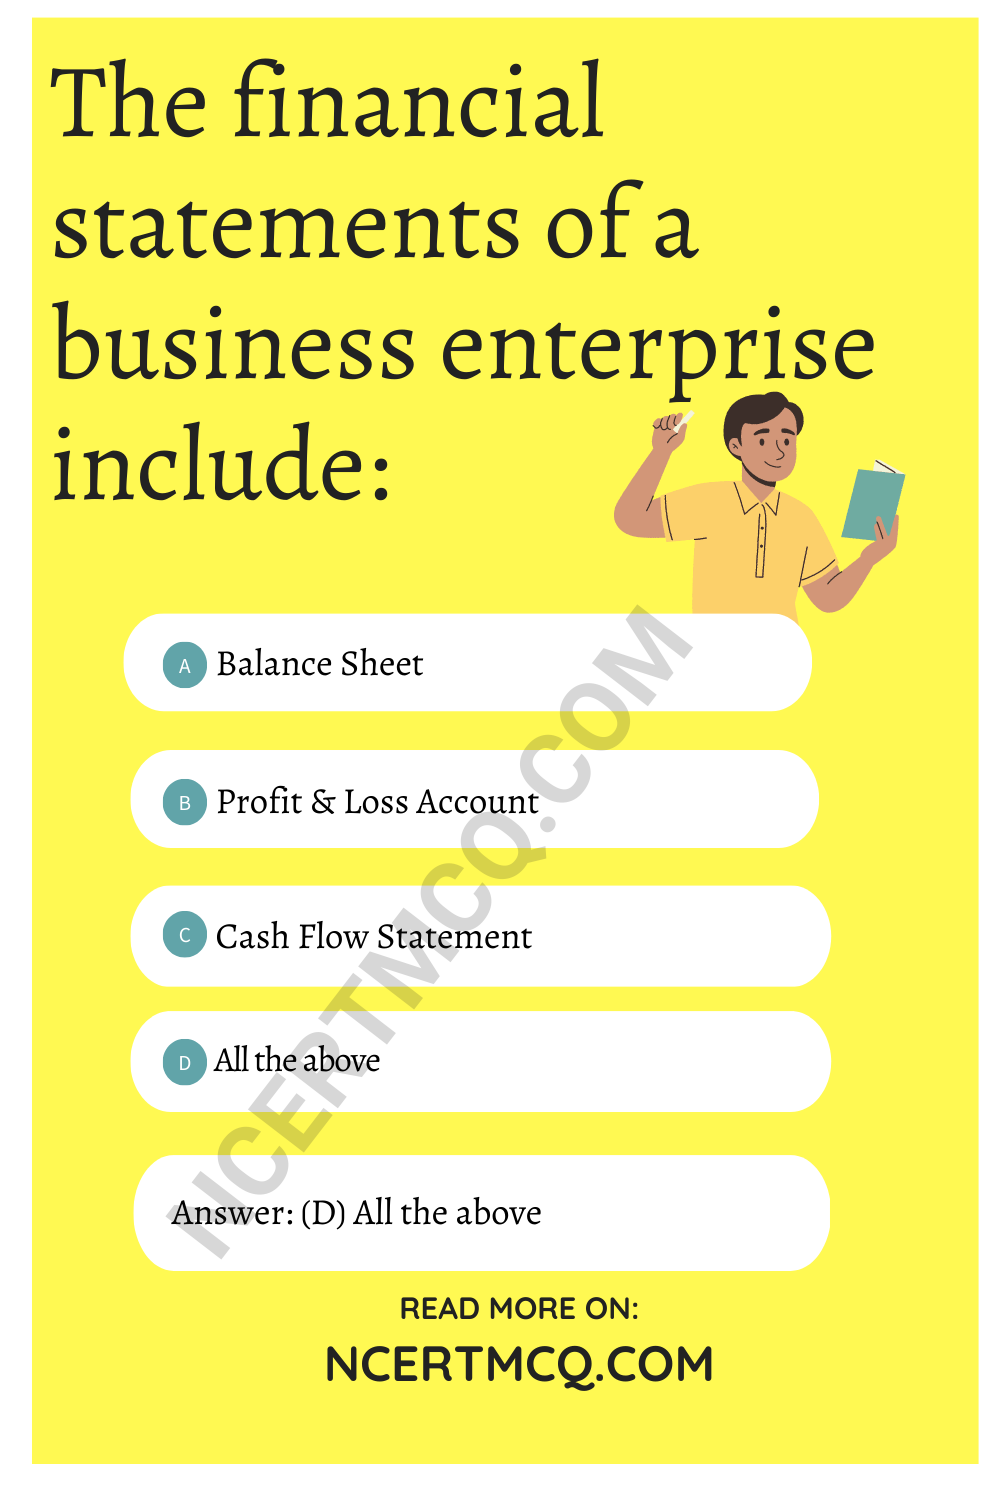 The financial statements of a business enterprise include: